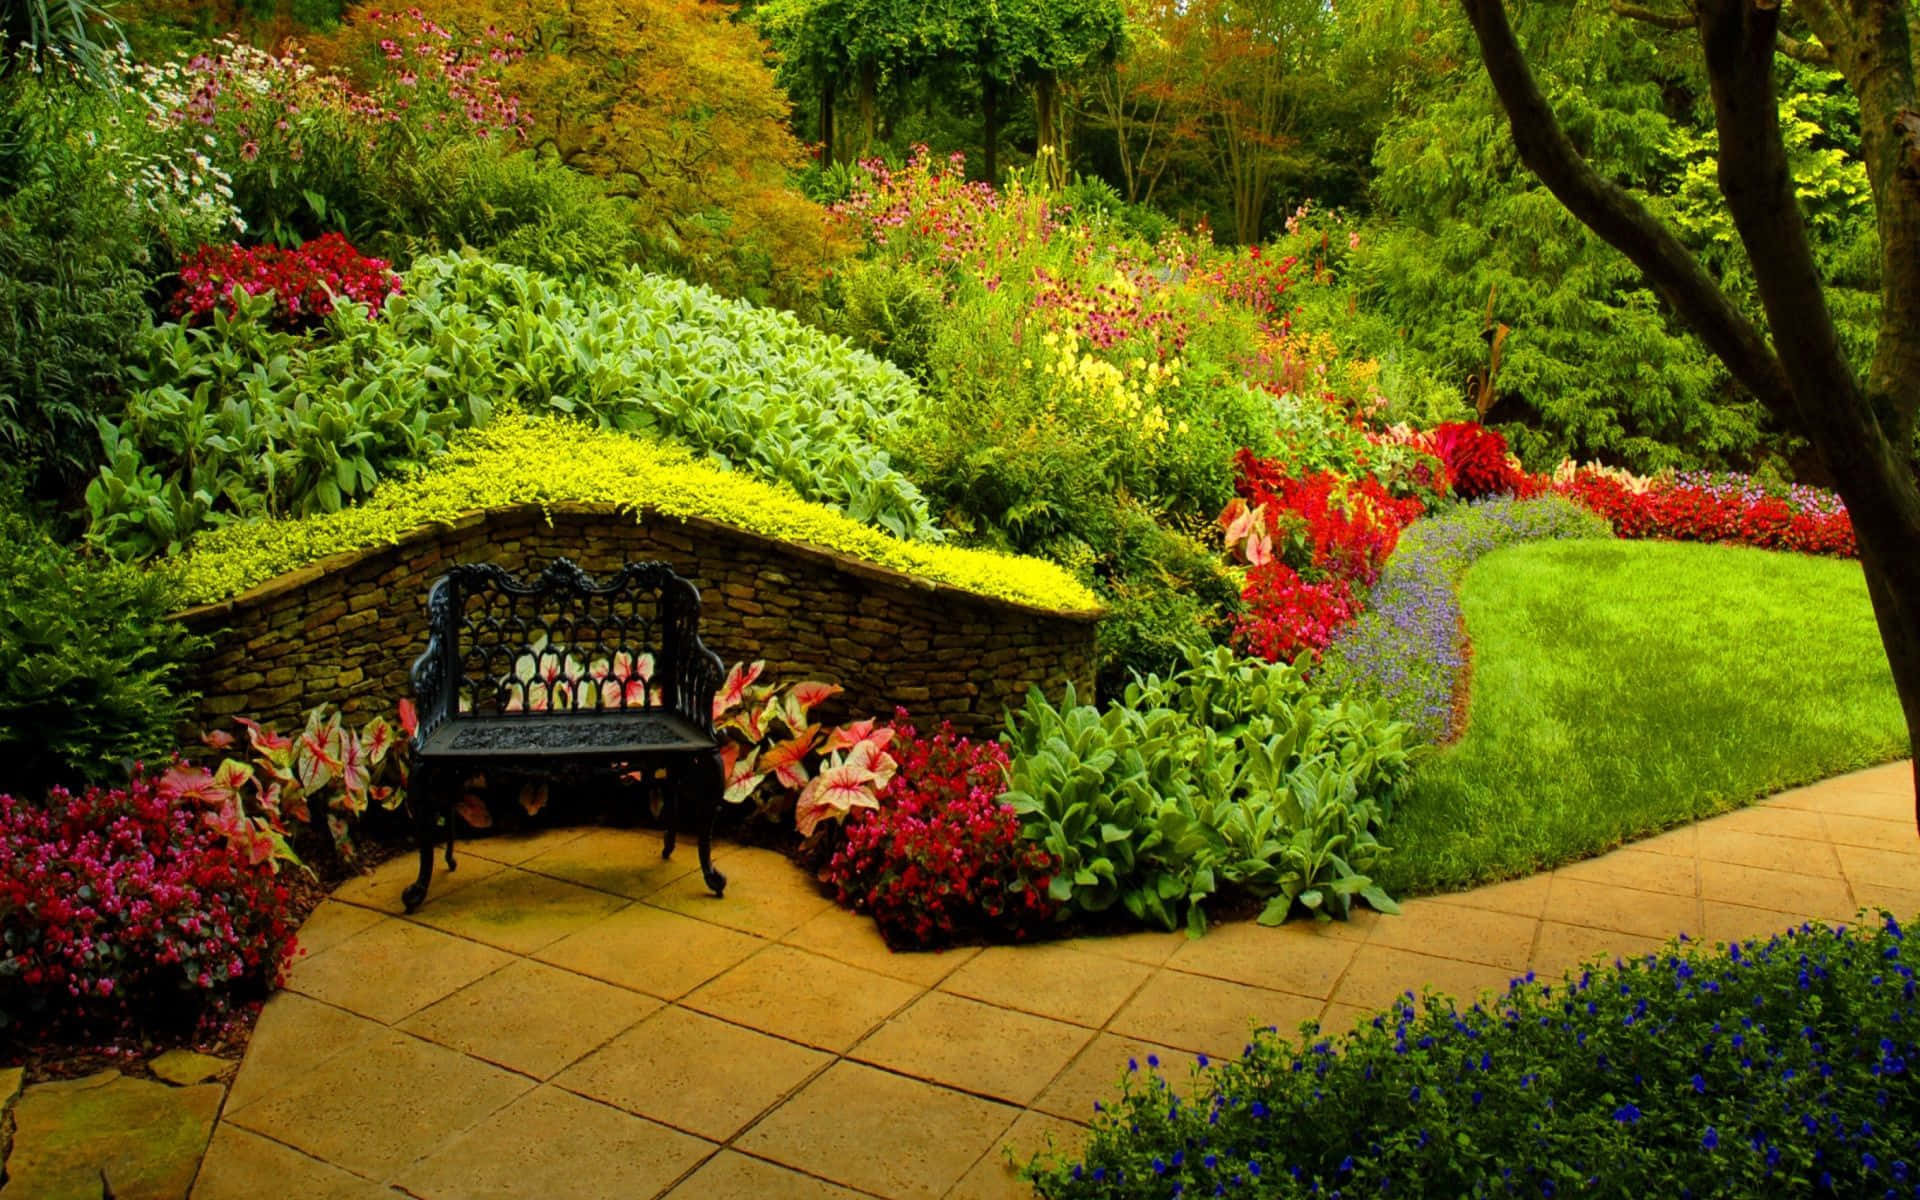 A Bench Is Sitting In A Garden With Flowers